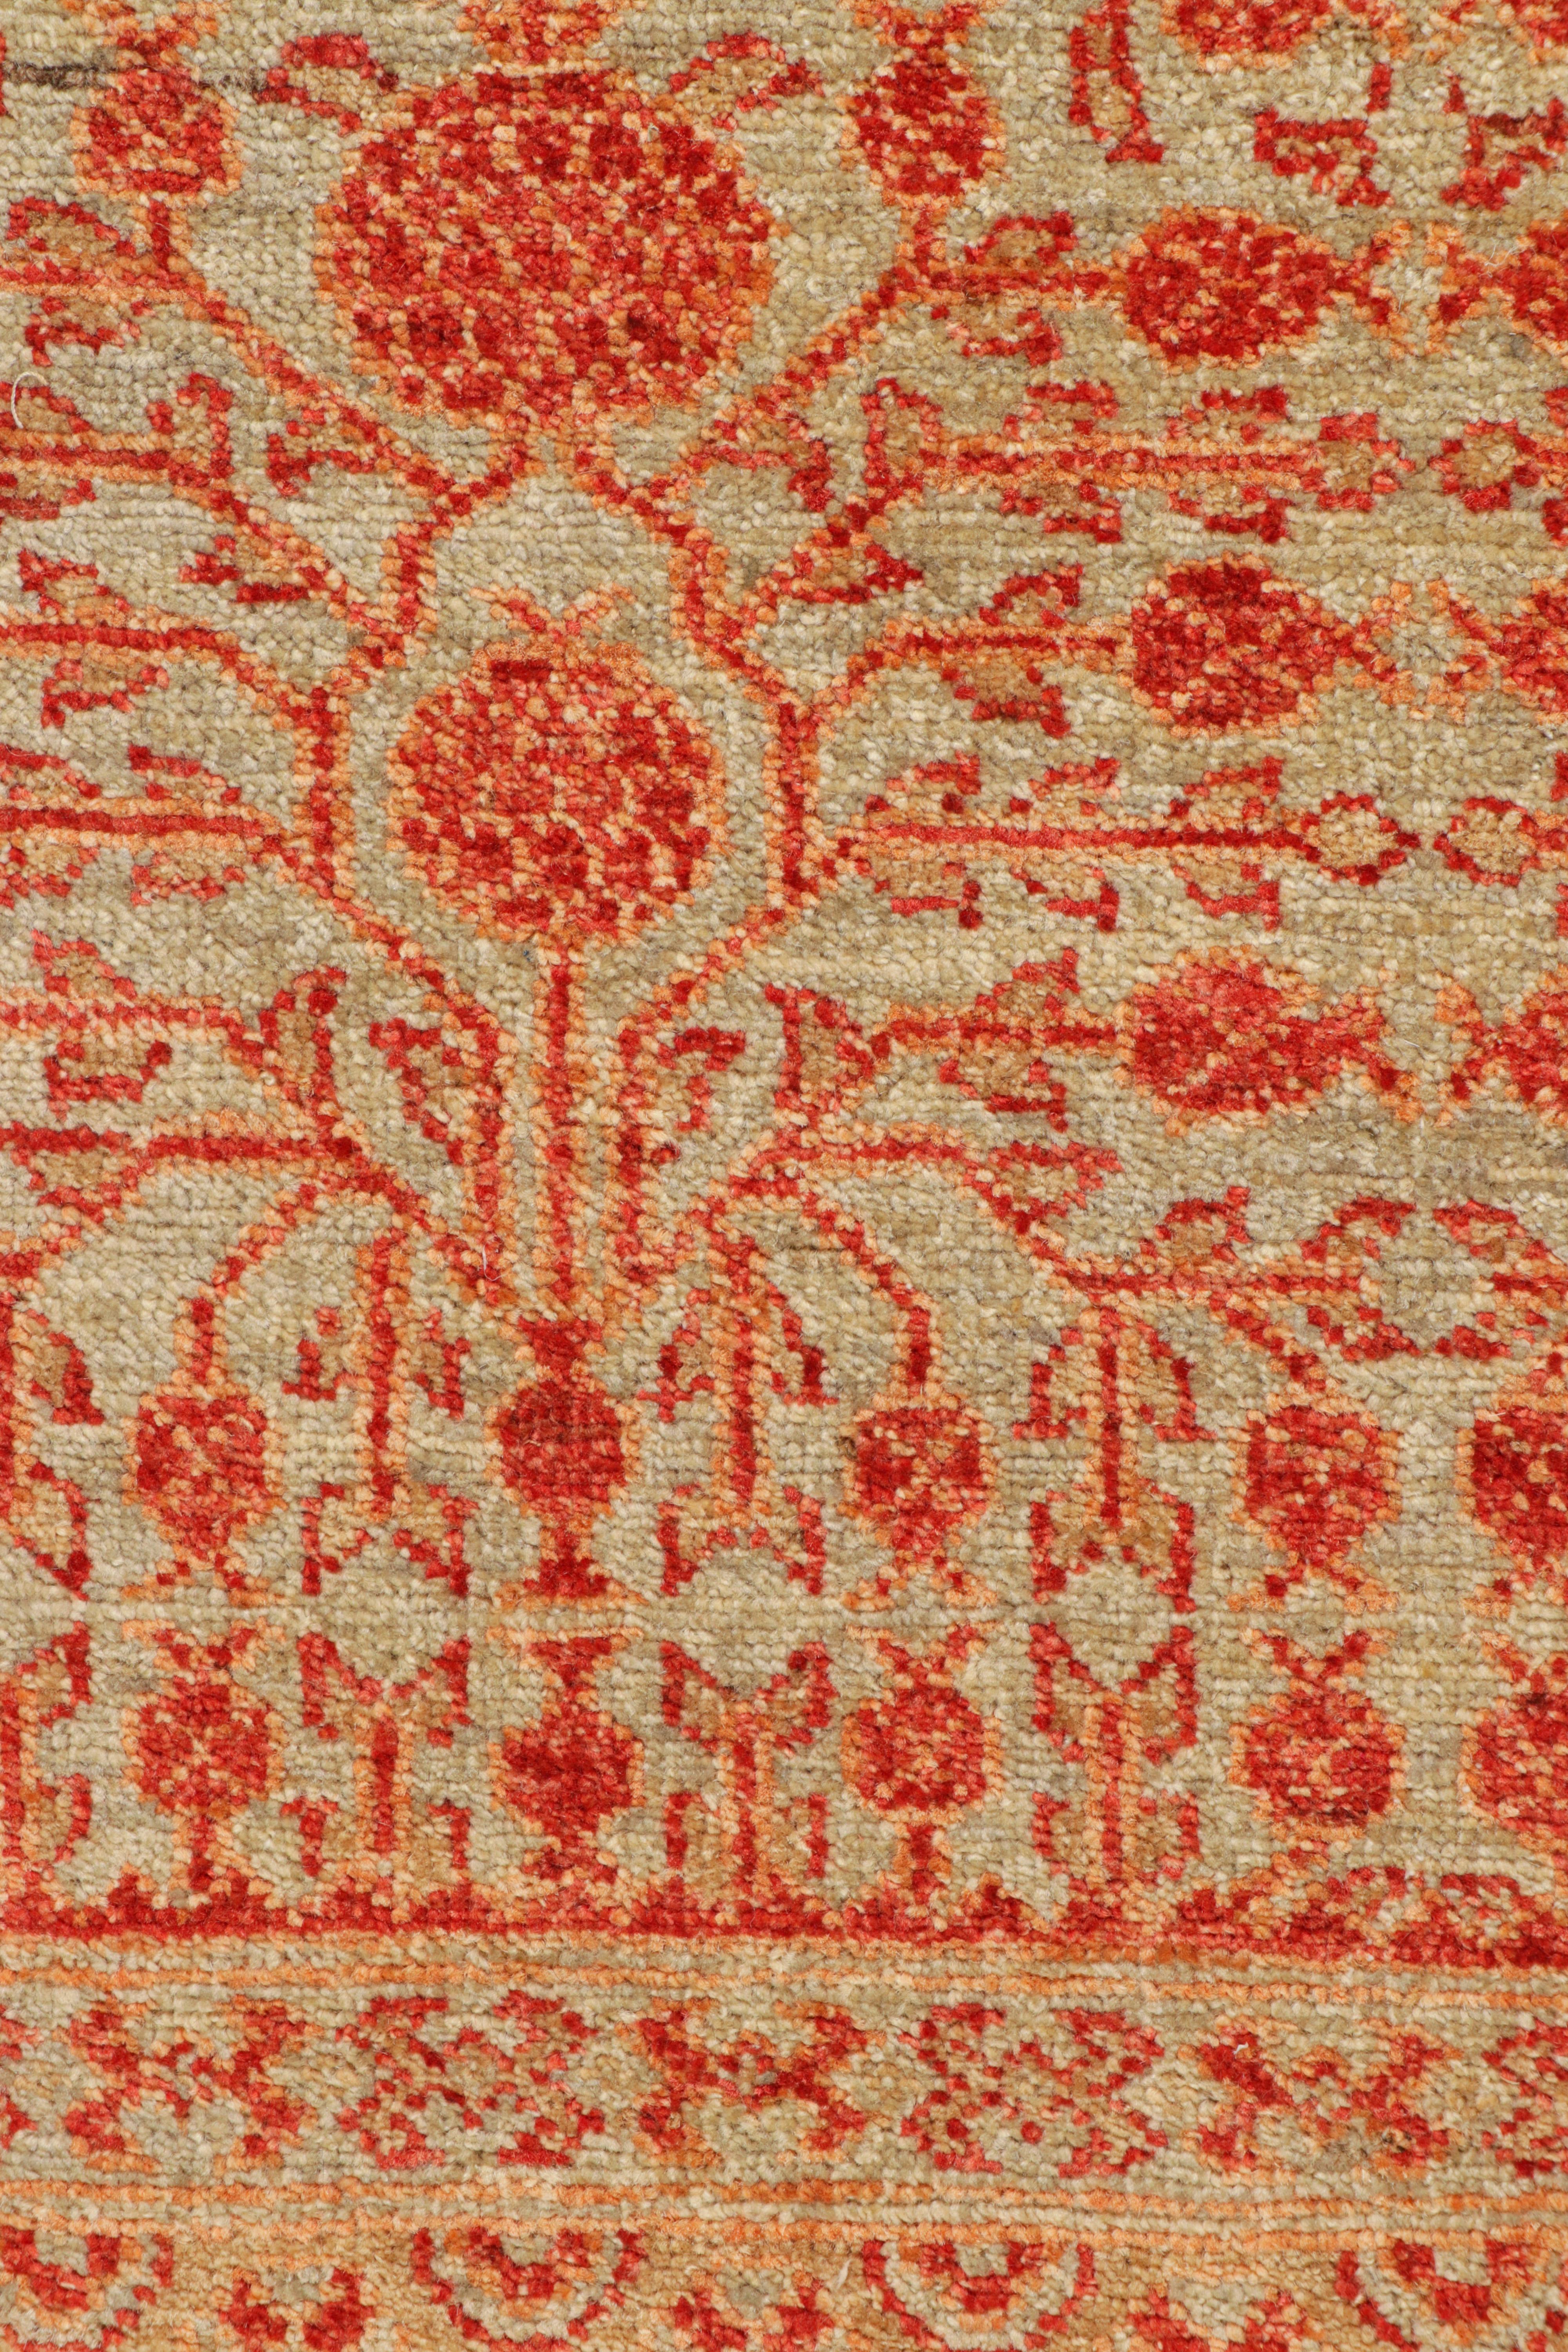 Modern Rug & Kilim’s Khotan Style Rug in Beige-Brown with Pomegranate Patterns For Sale